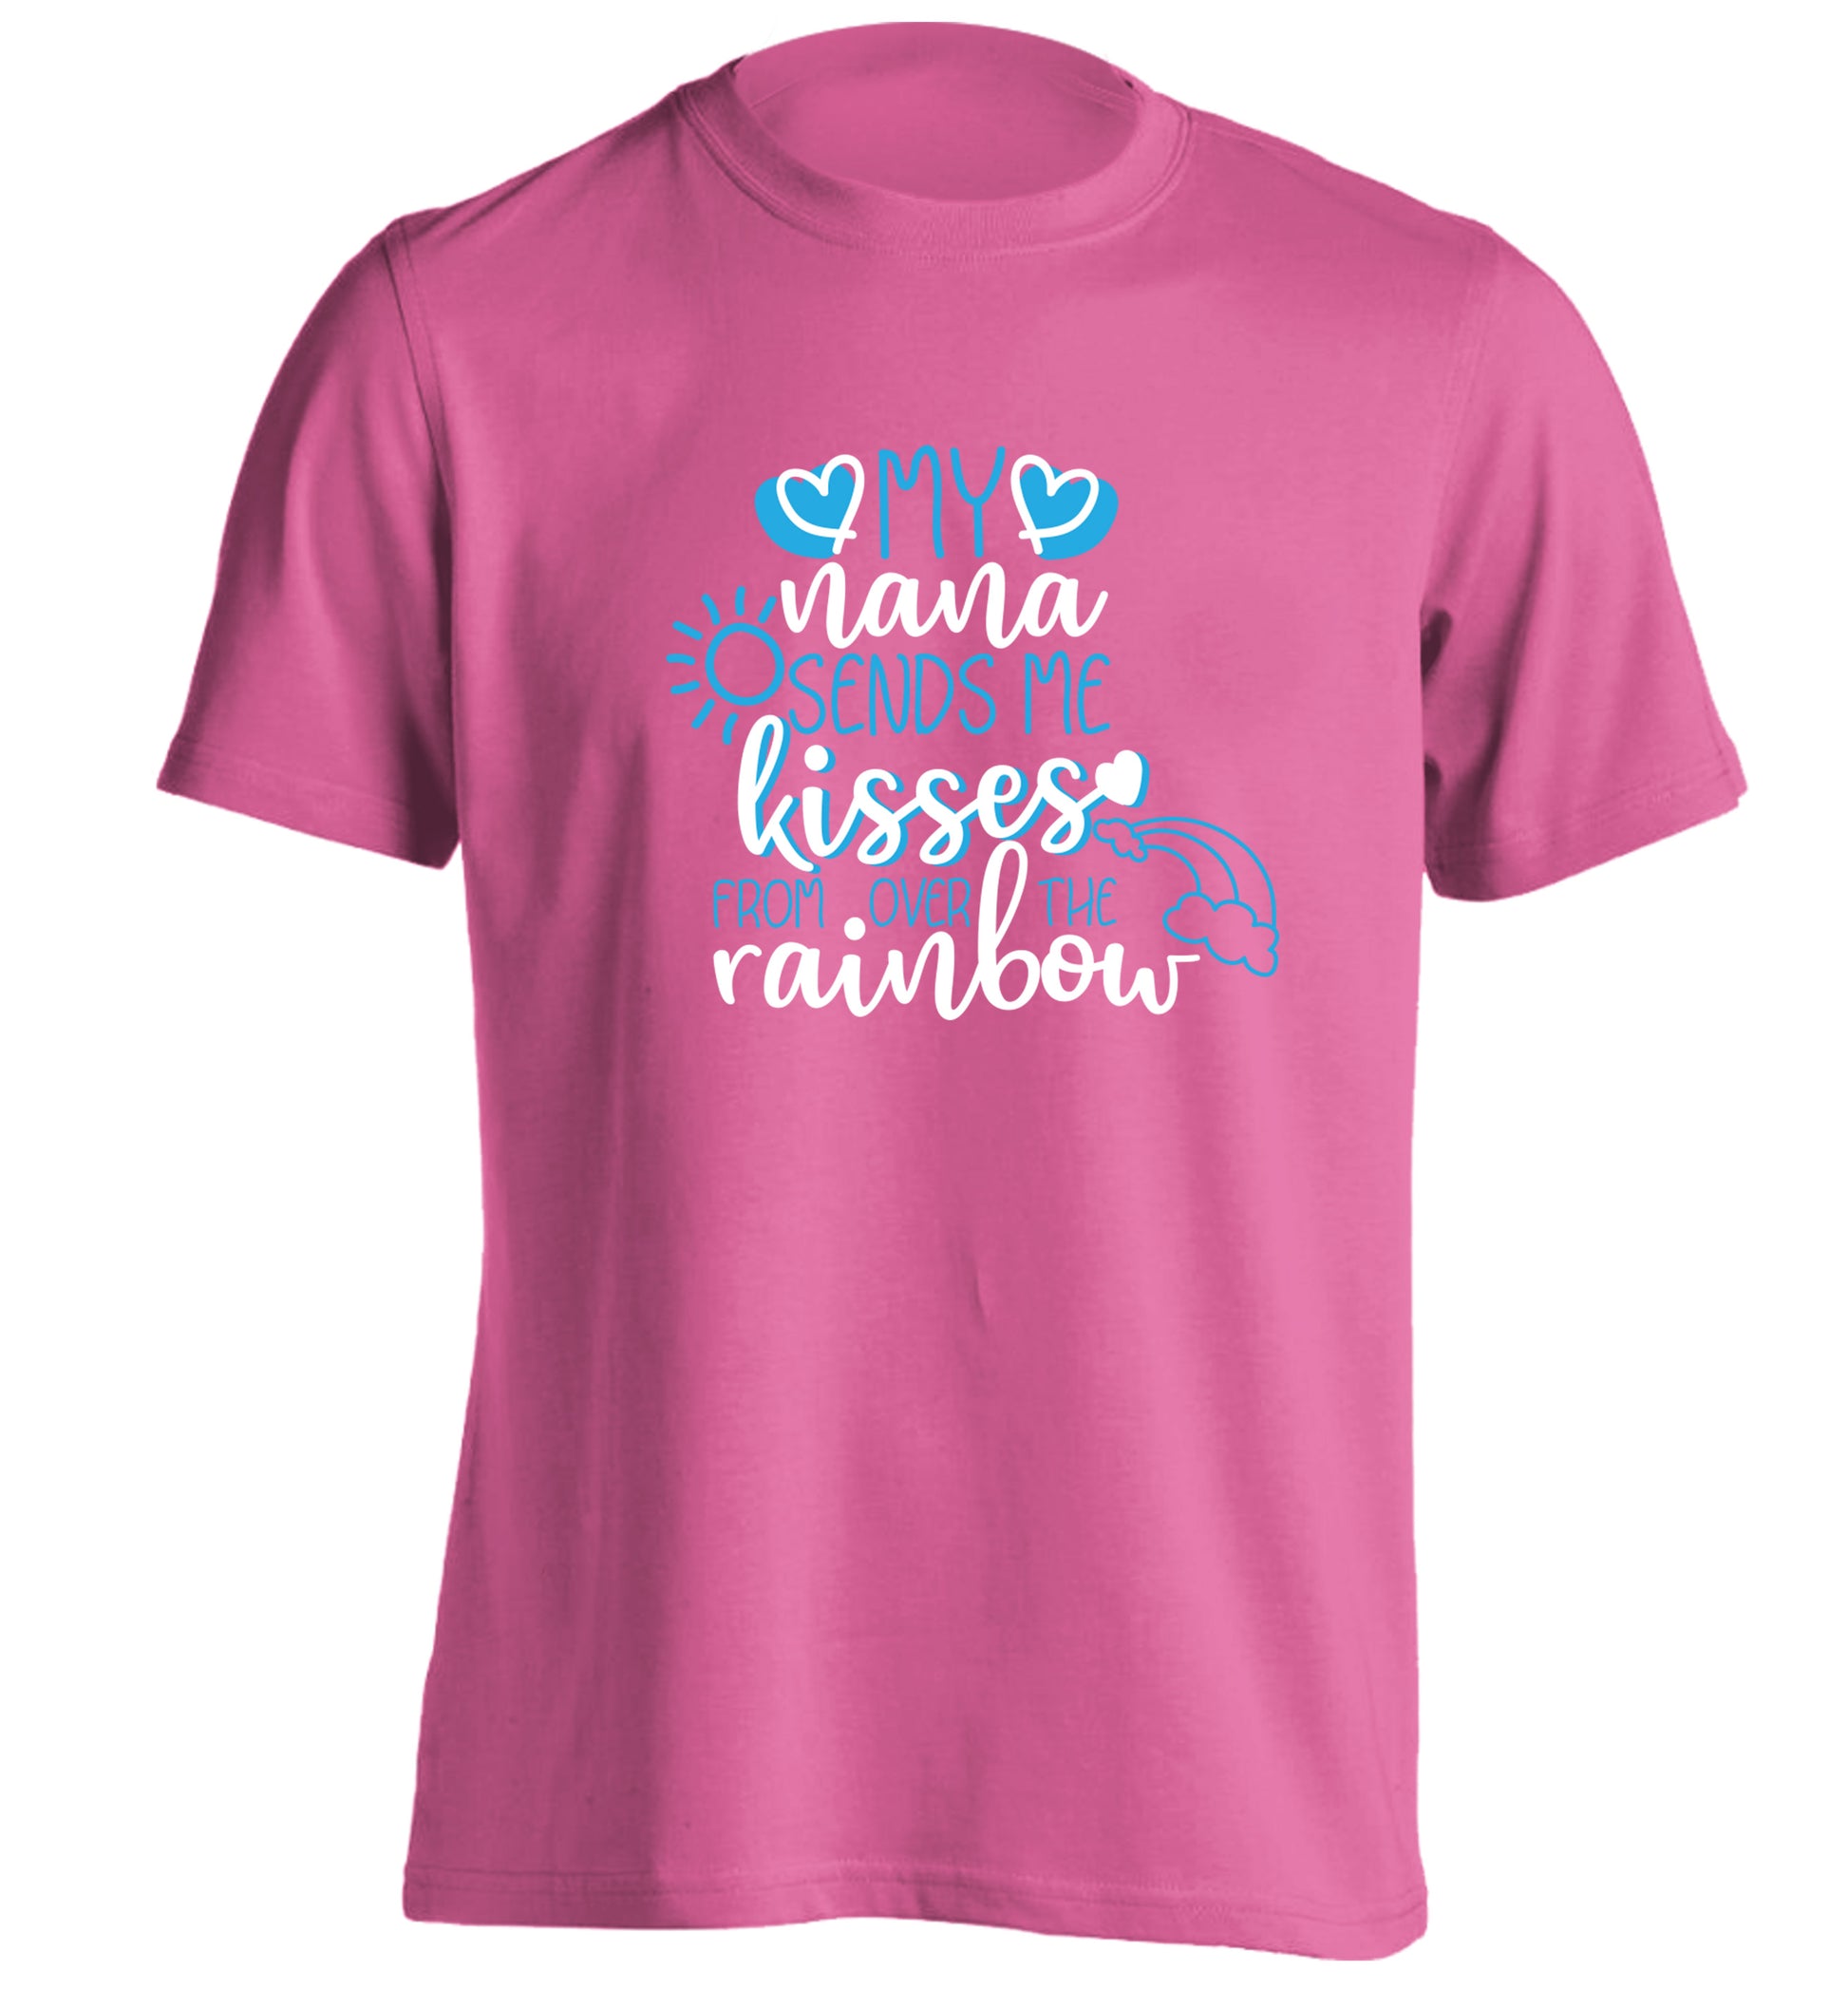 My nana sends me kisses from over the rainbow adults unisex pink Tshirt 2XL